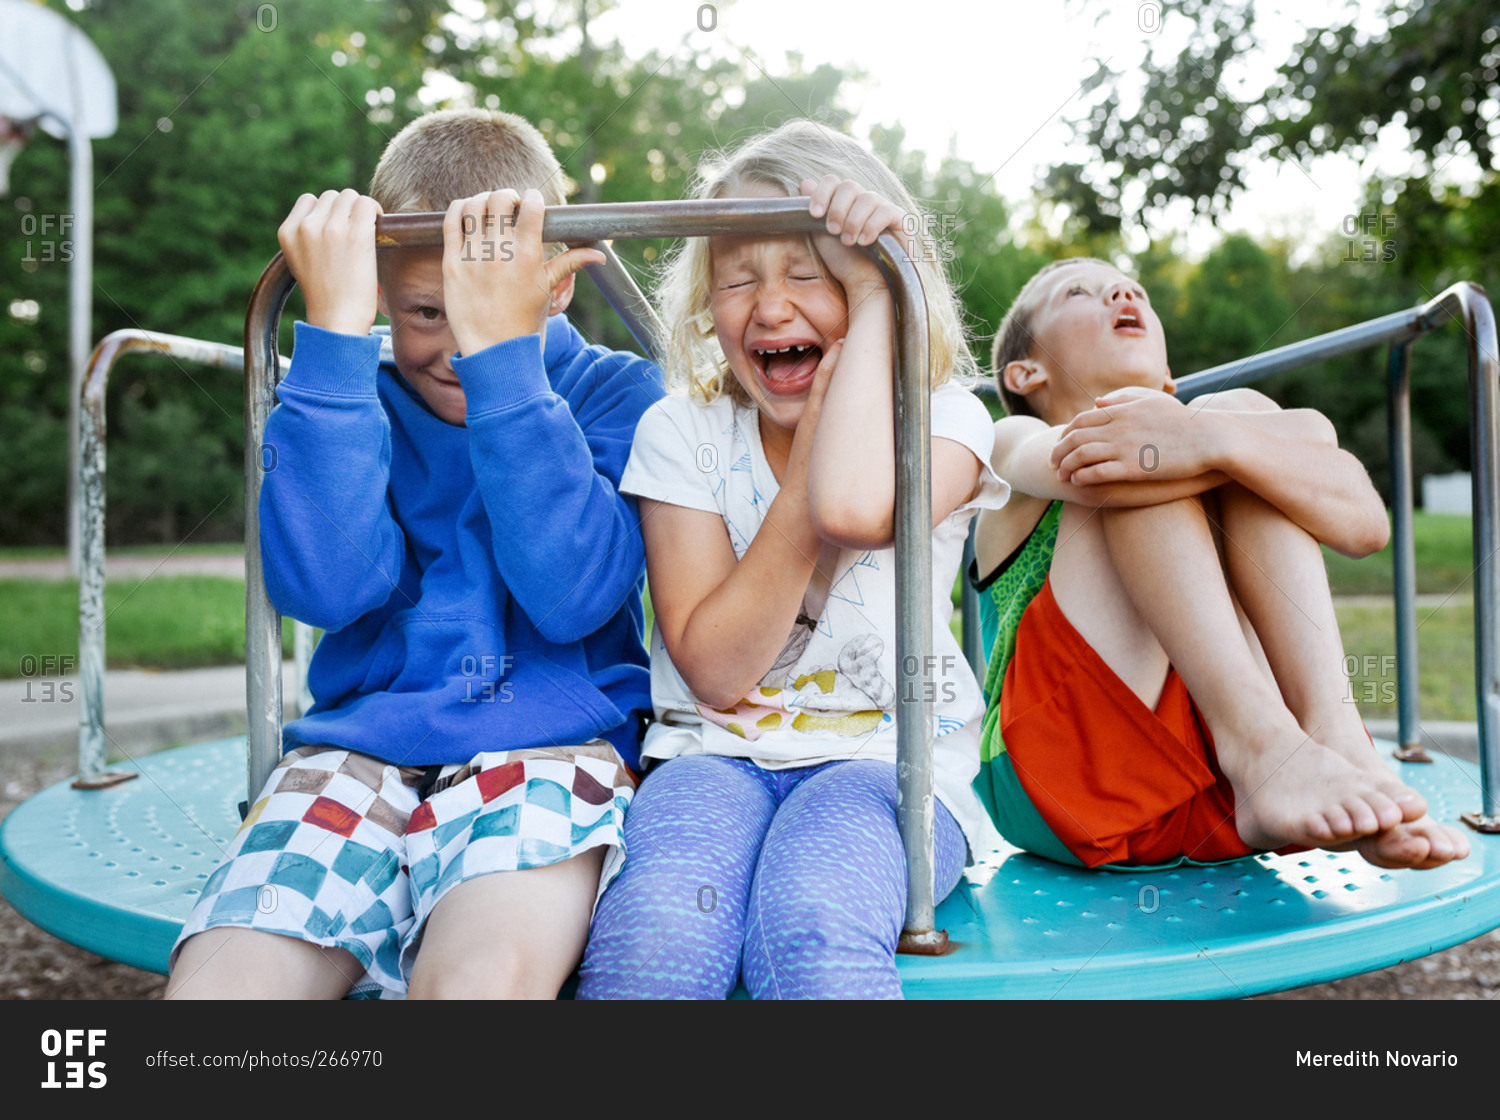 Children pretending to be scared on a merry-go-round